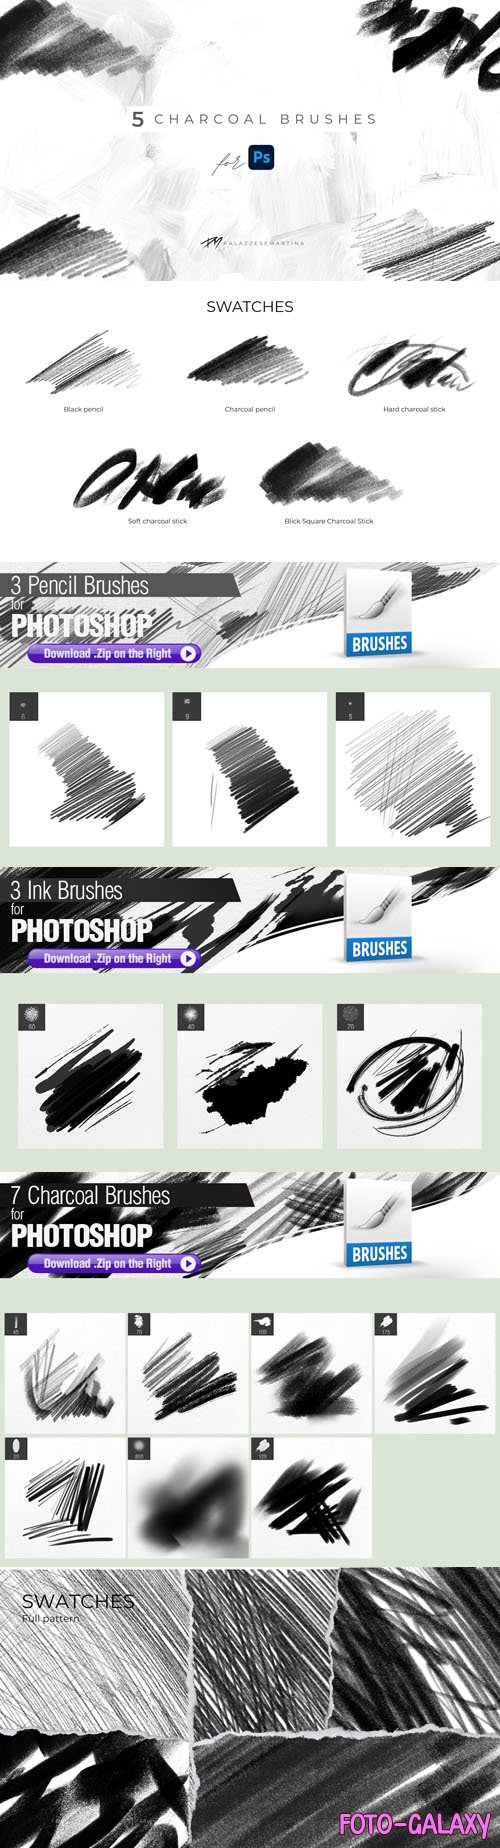 Charcoal & Pencil Brushes Pack for Photoshop